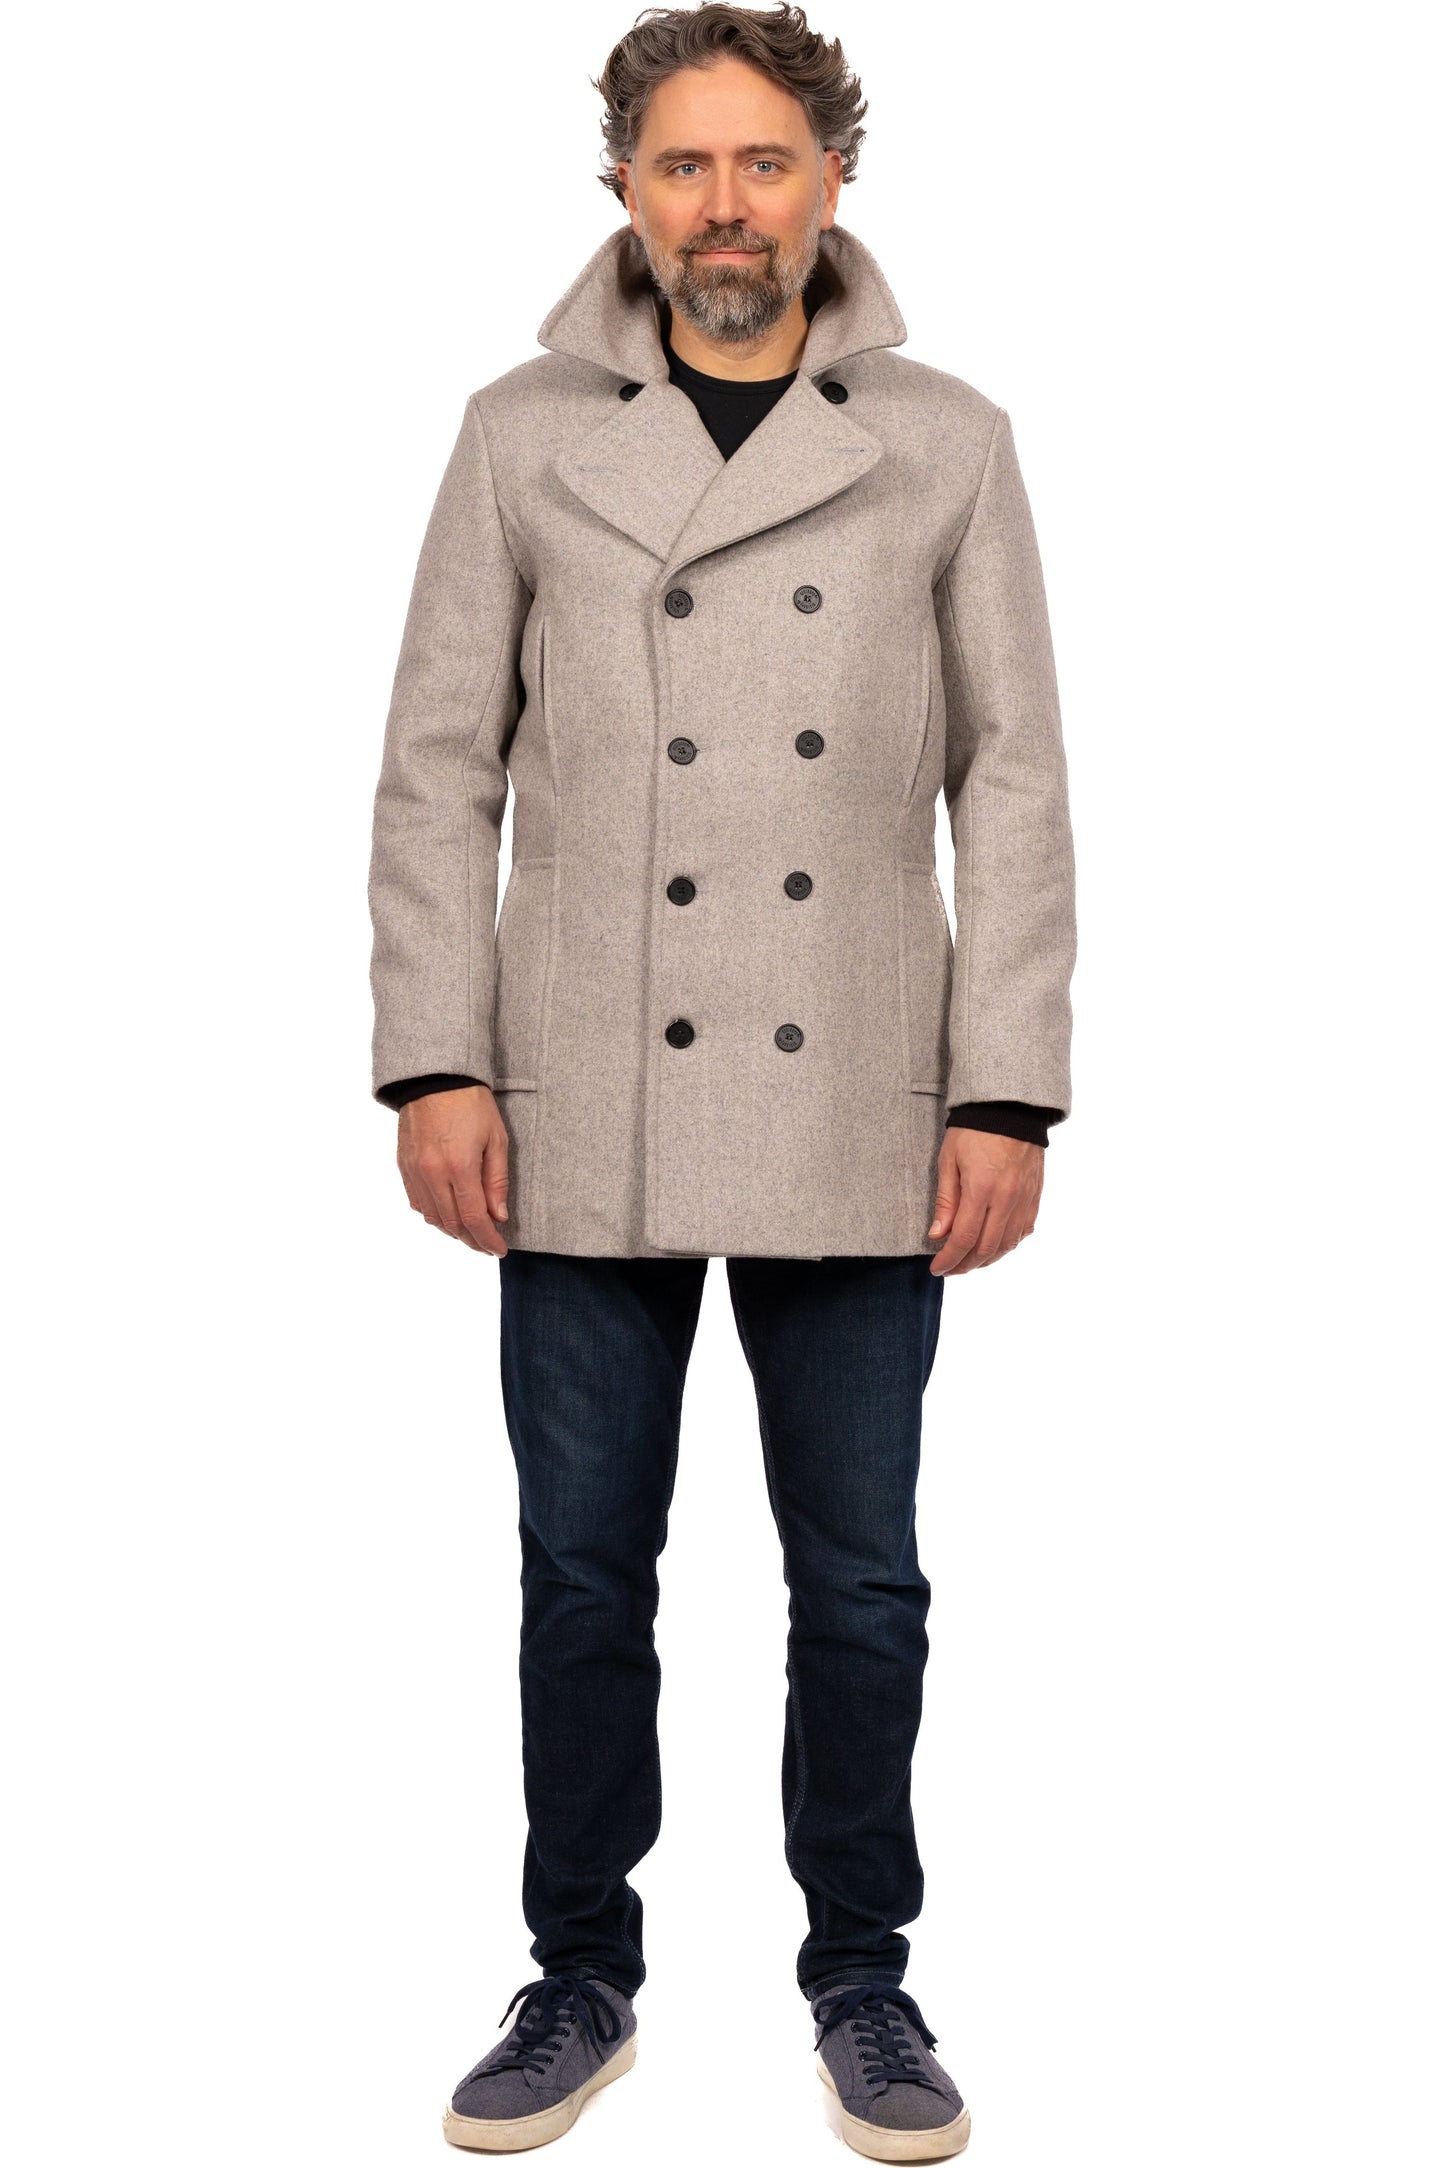 Desloups winter coat in pea coat style for men, double-breasted in 100% wool and lined